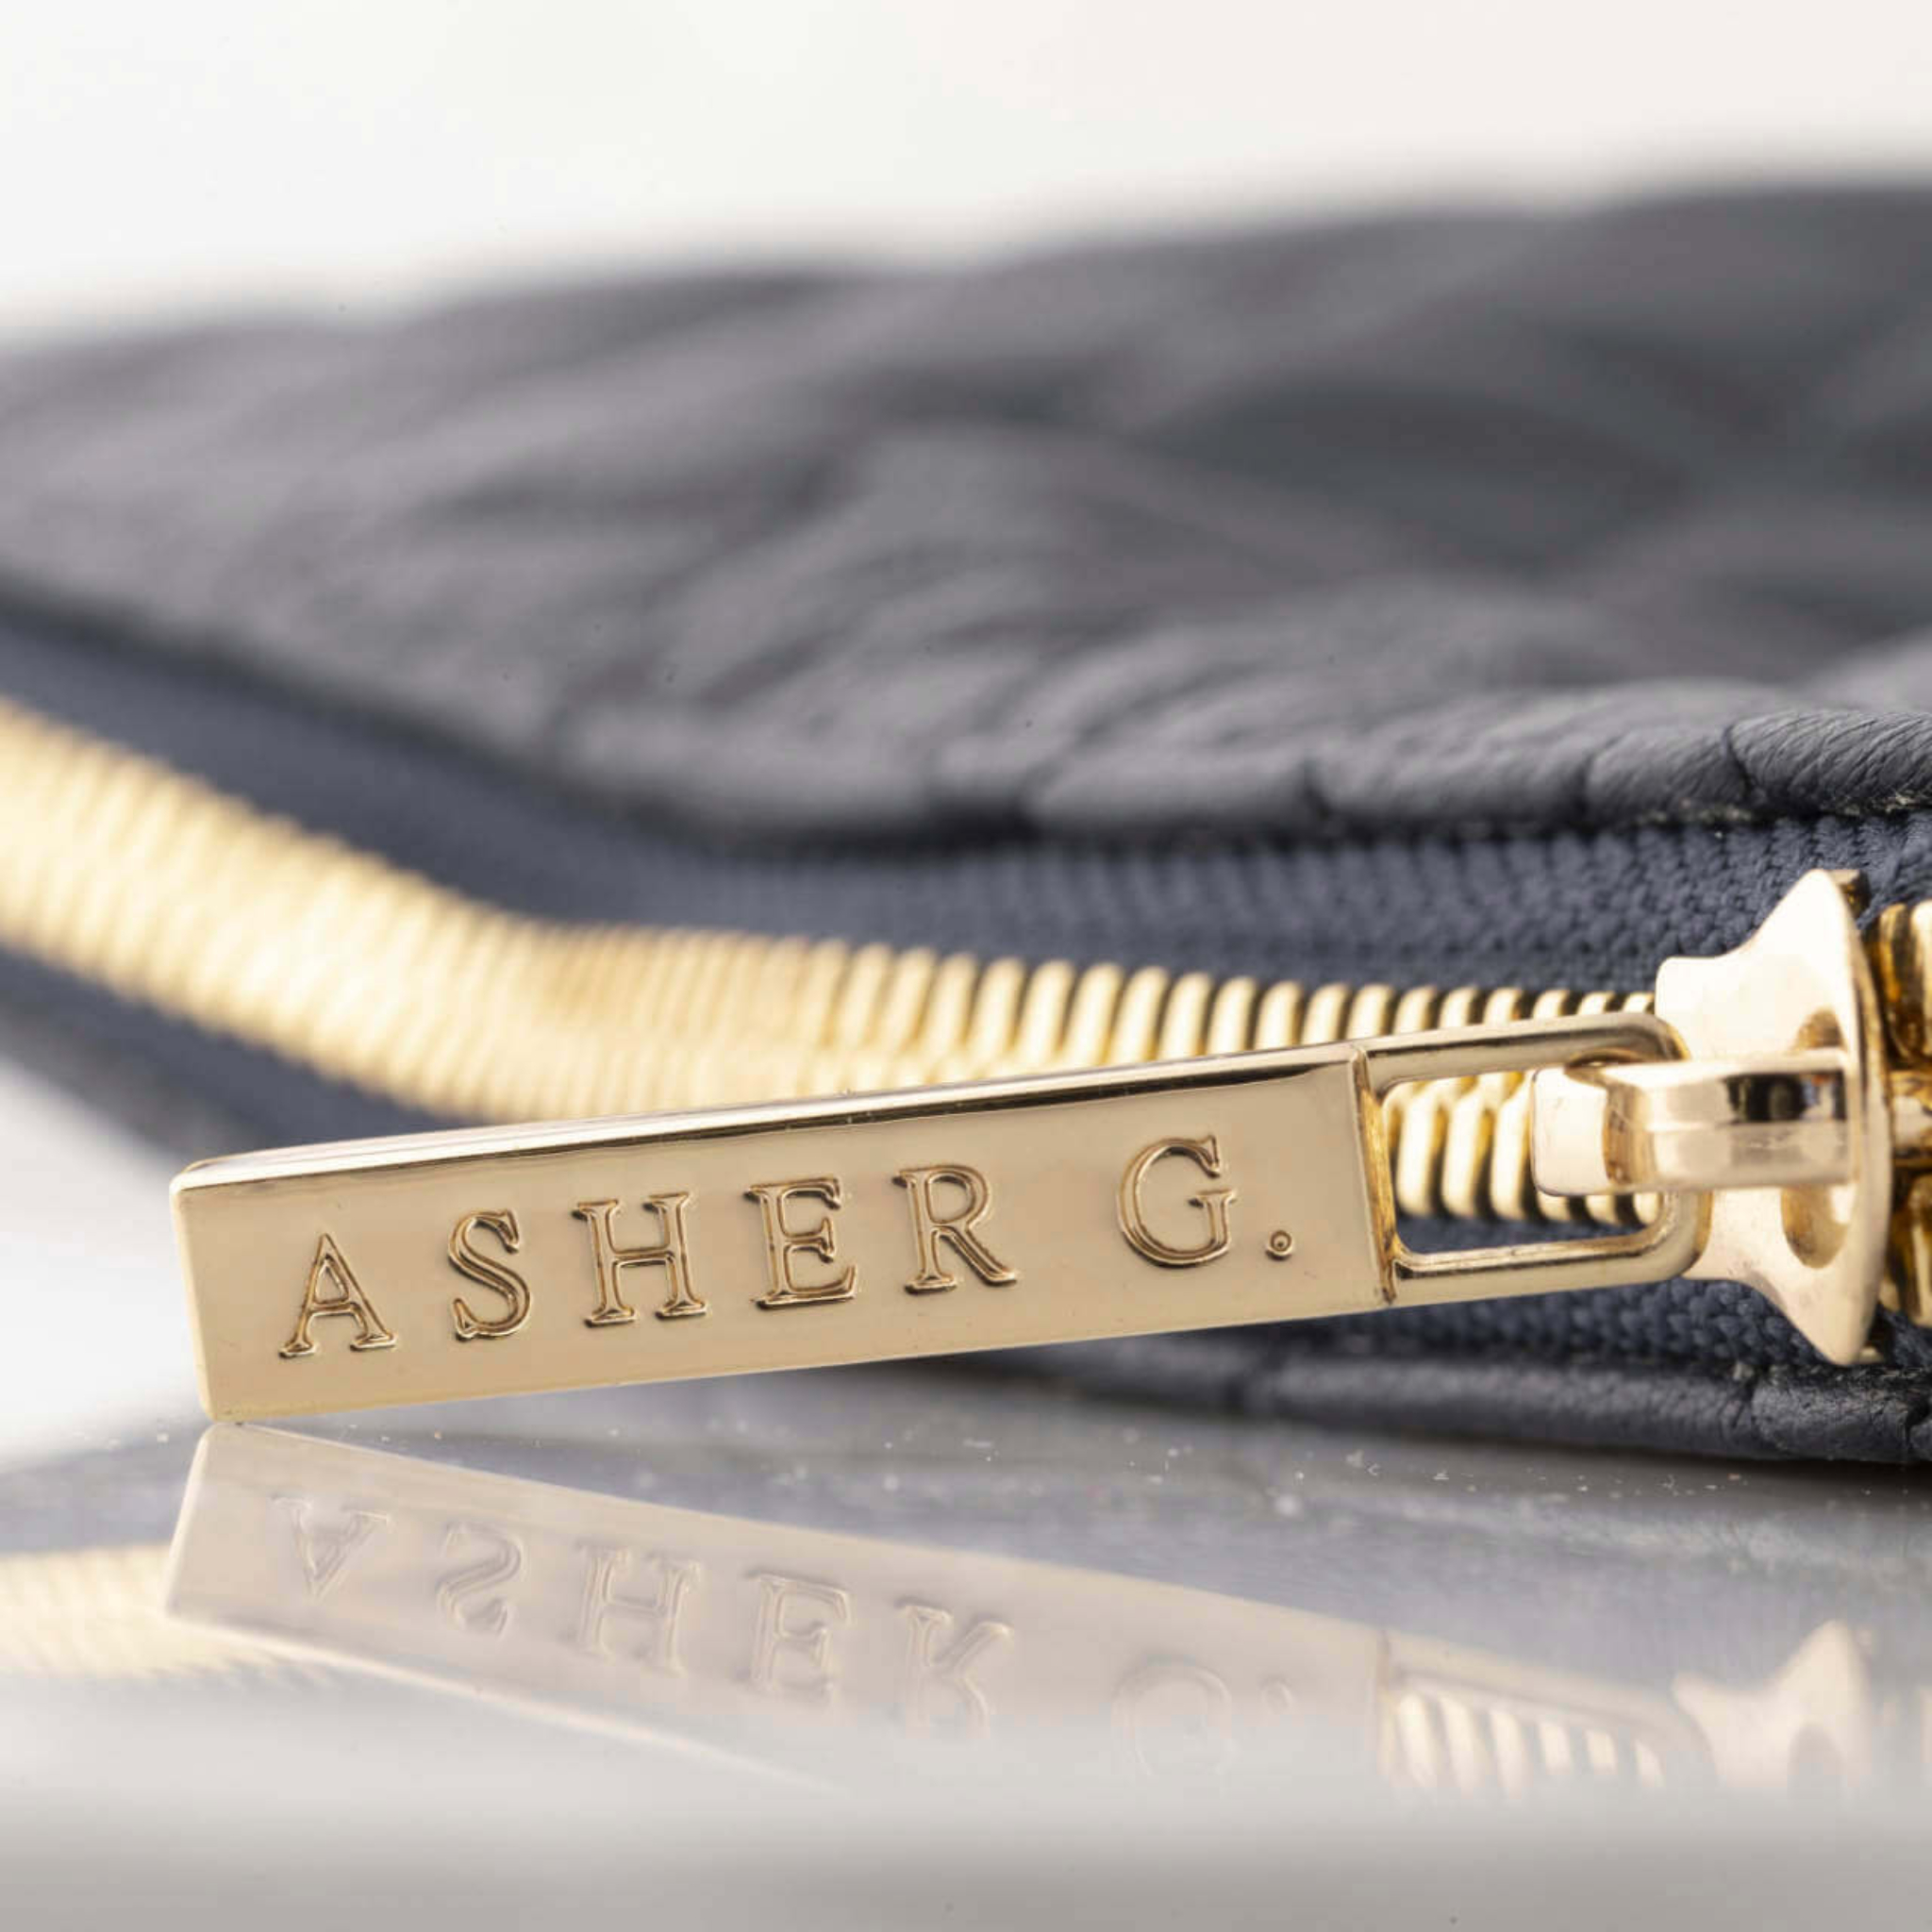 Asher Cases